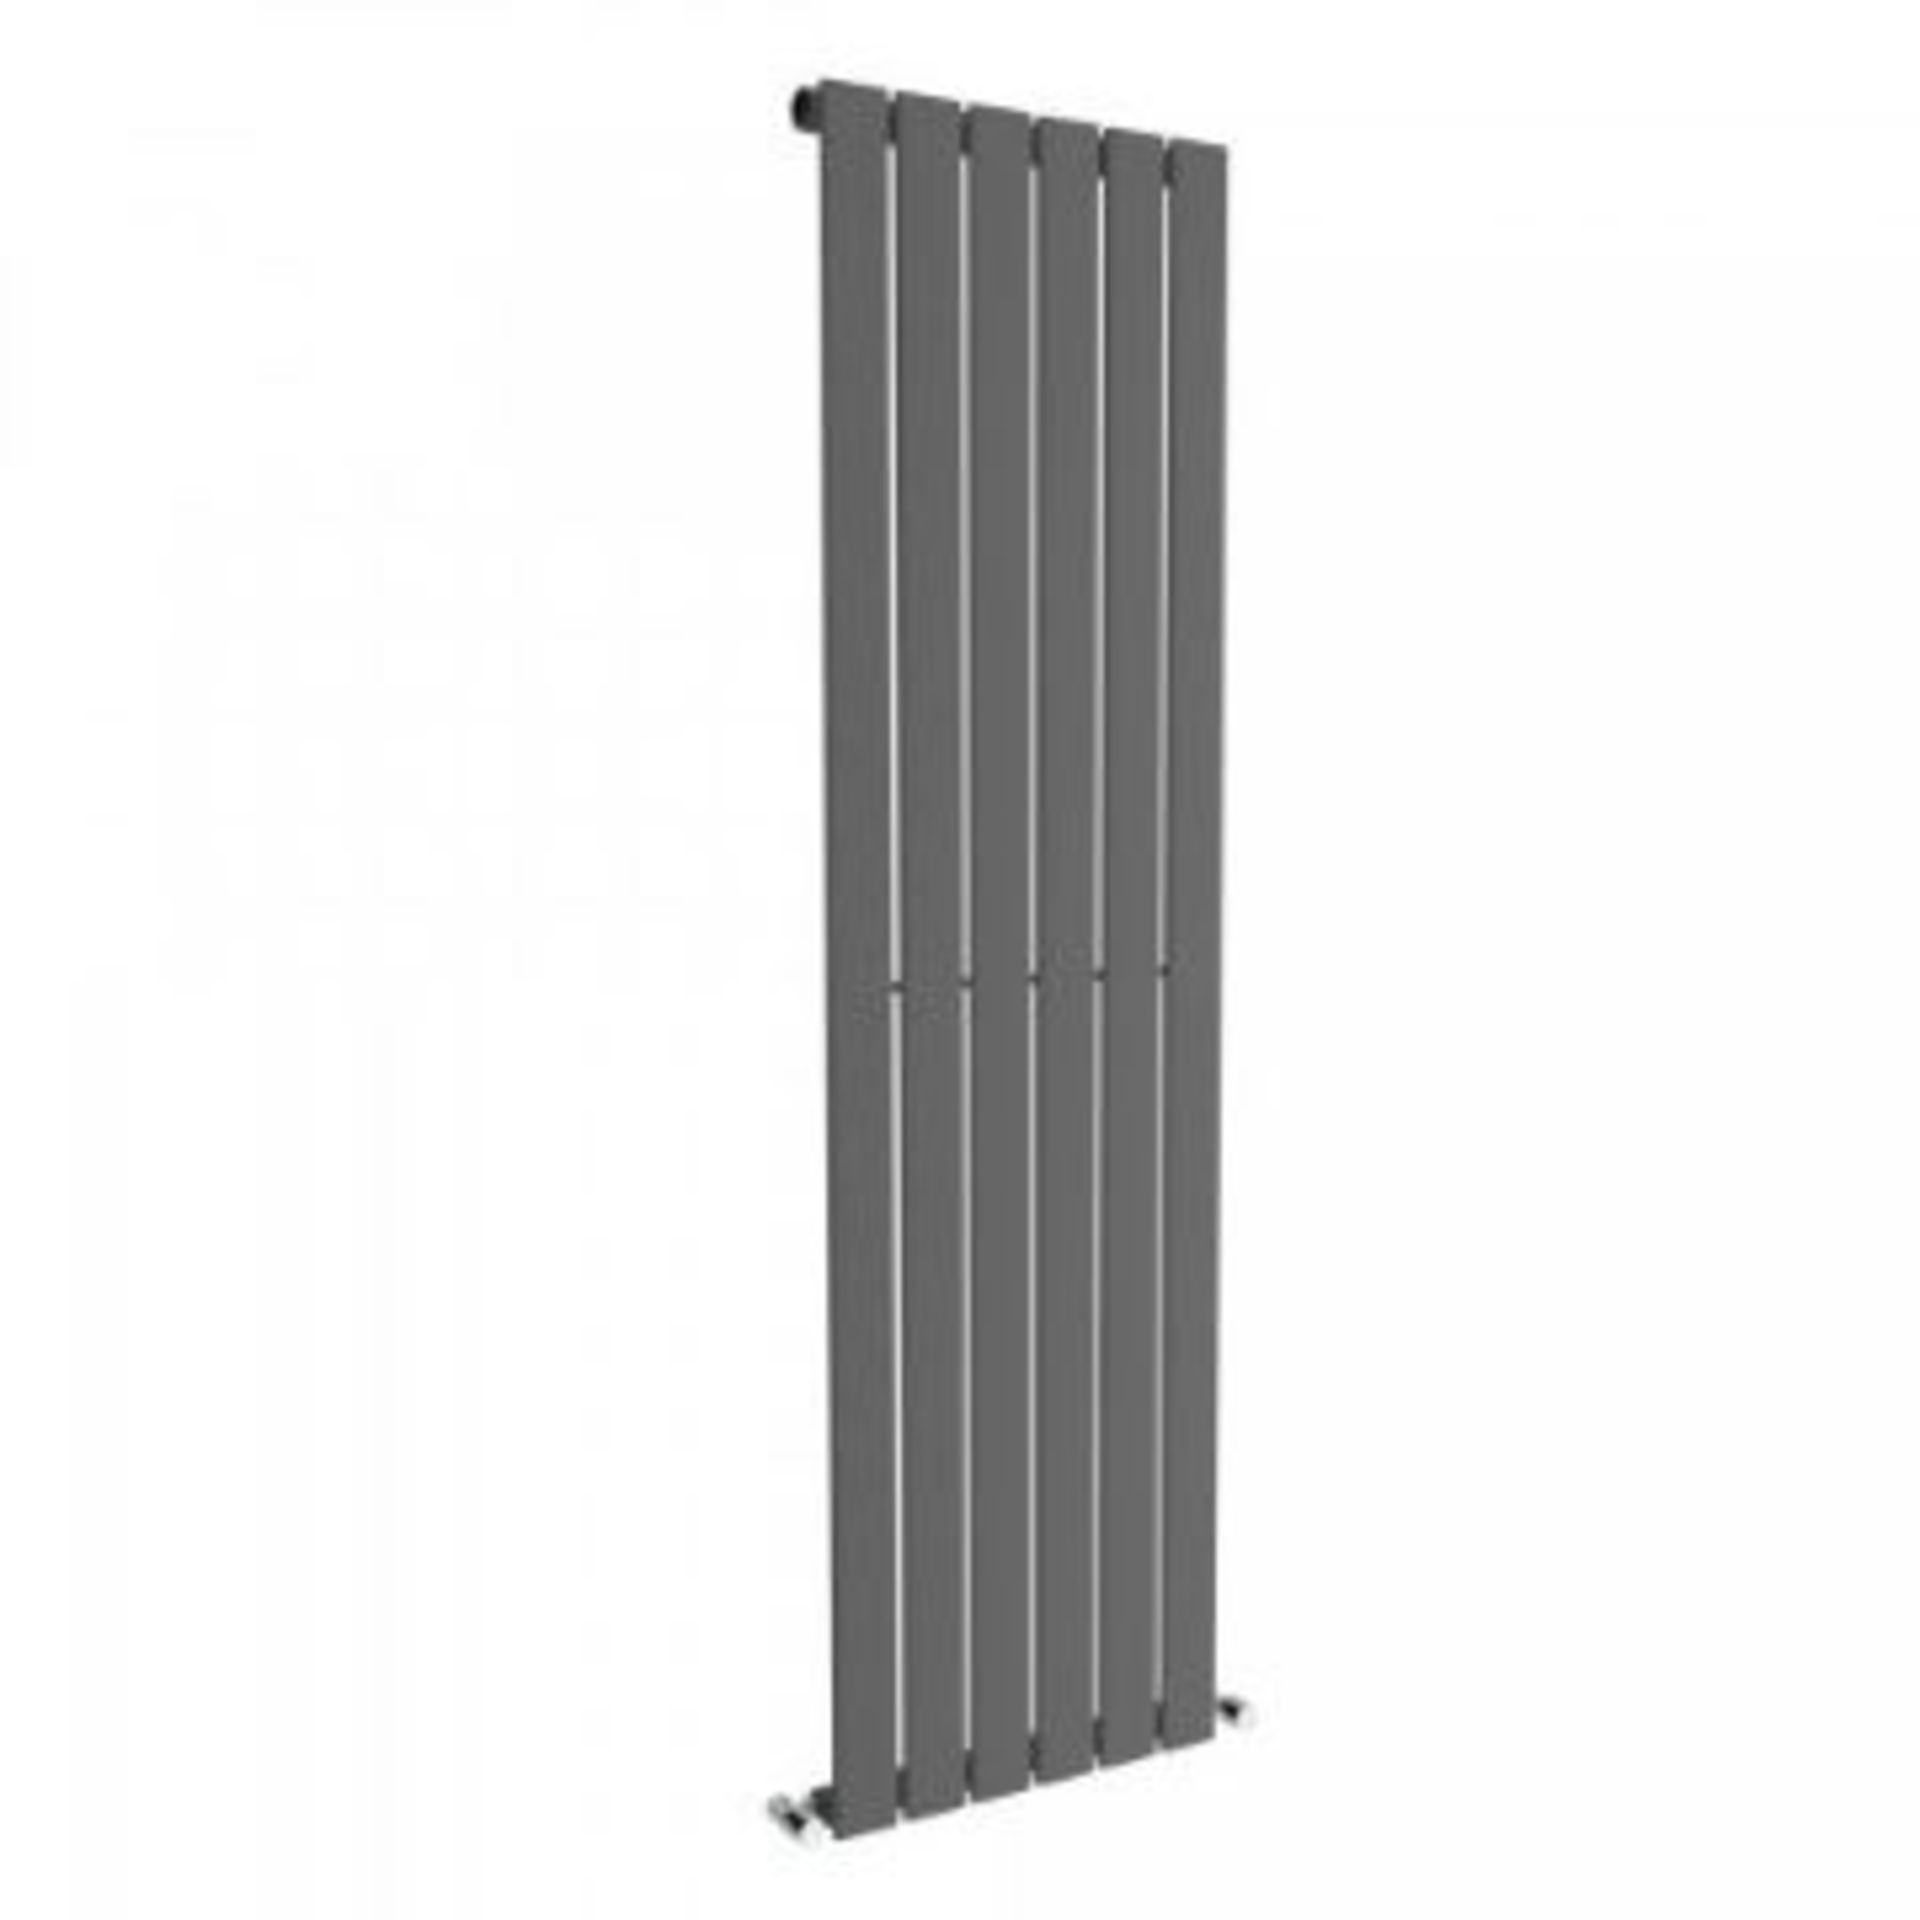 New Boxed 1600X452Mm Anthracite Single Flat Panel Vertical Radiator. Rc209.Rrp £307.99 Each. ... - Image 2 of 2